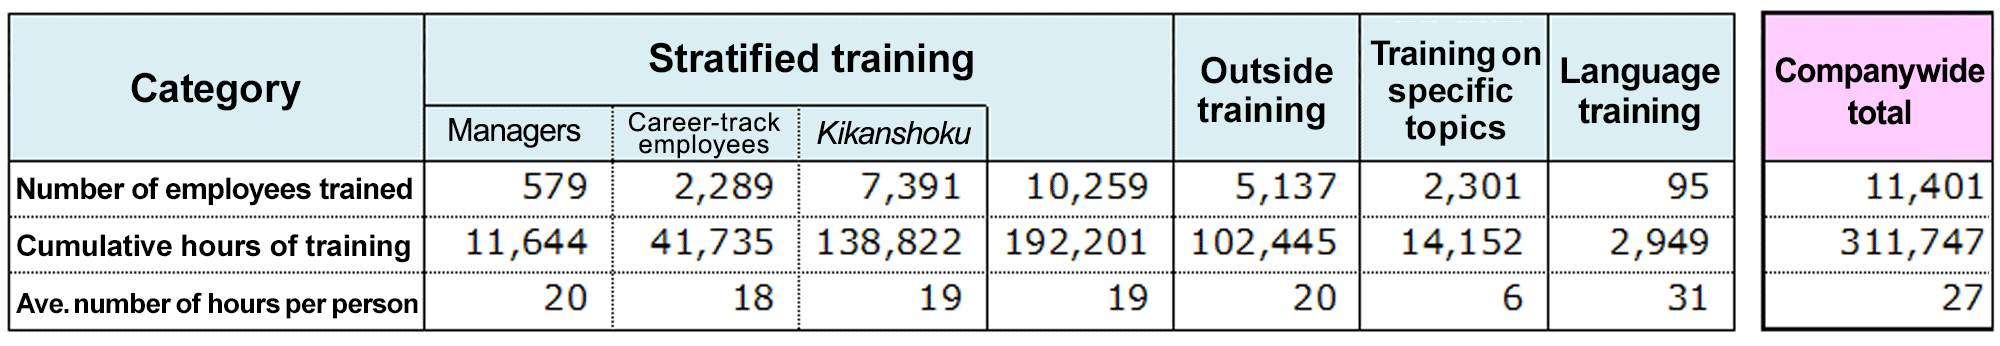 Training results in Fiscal 2018